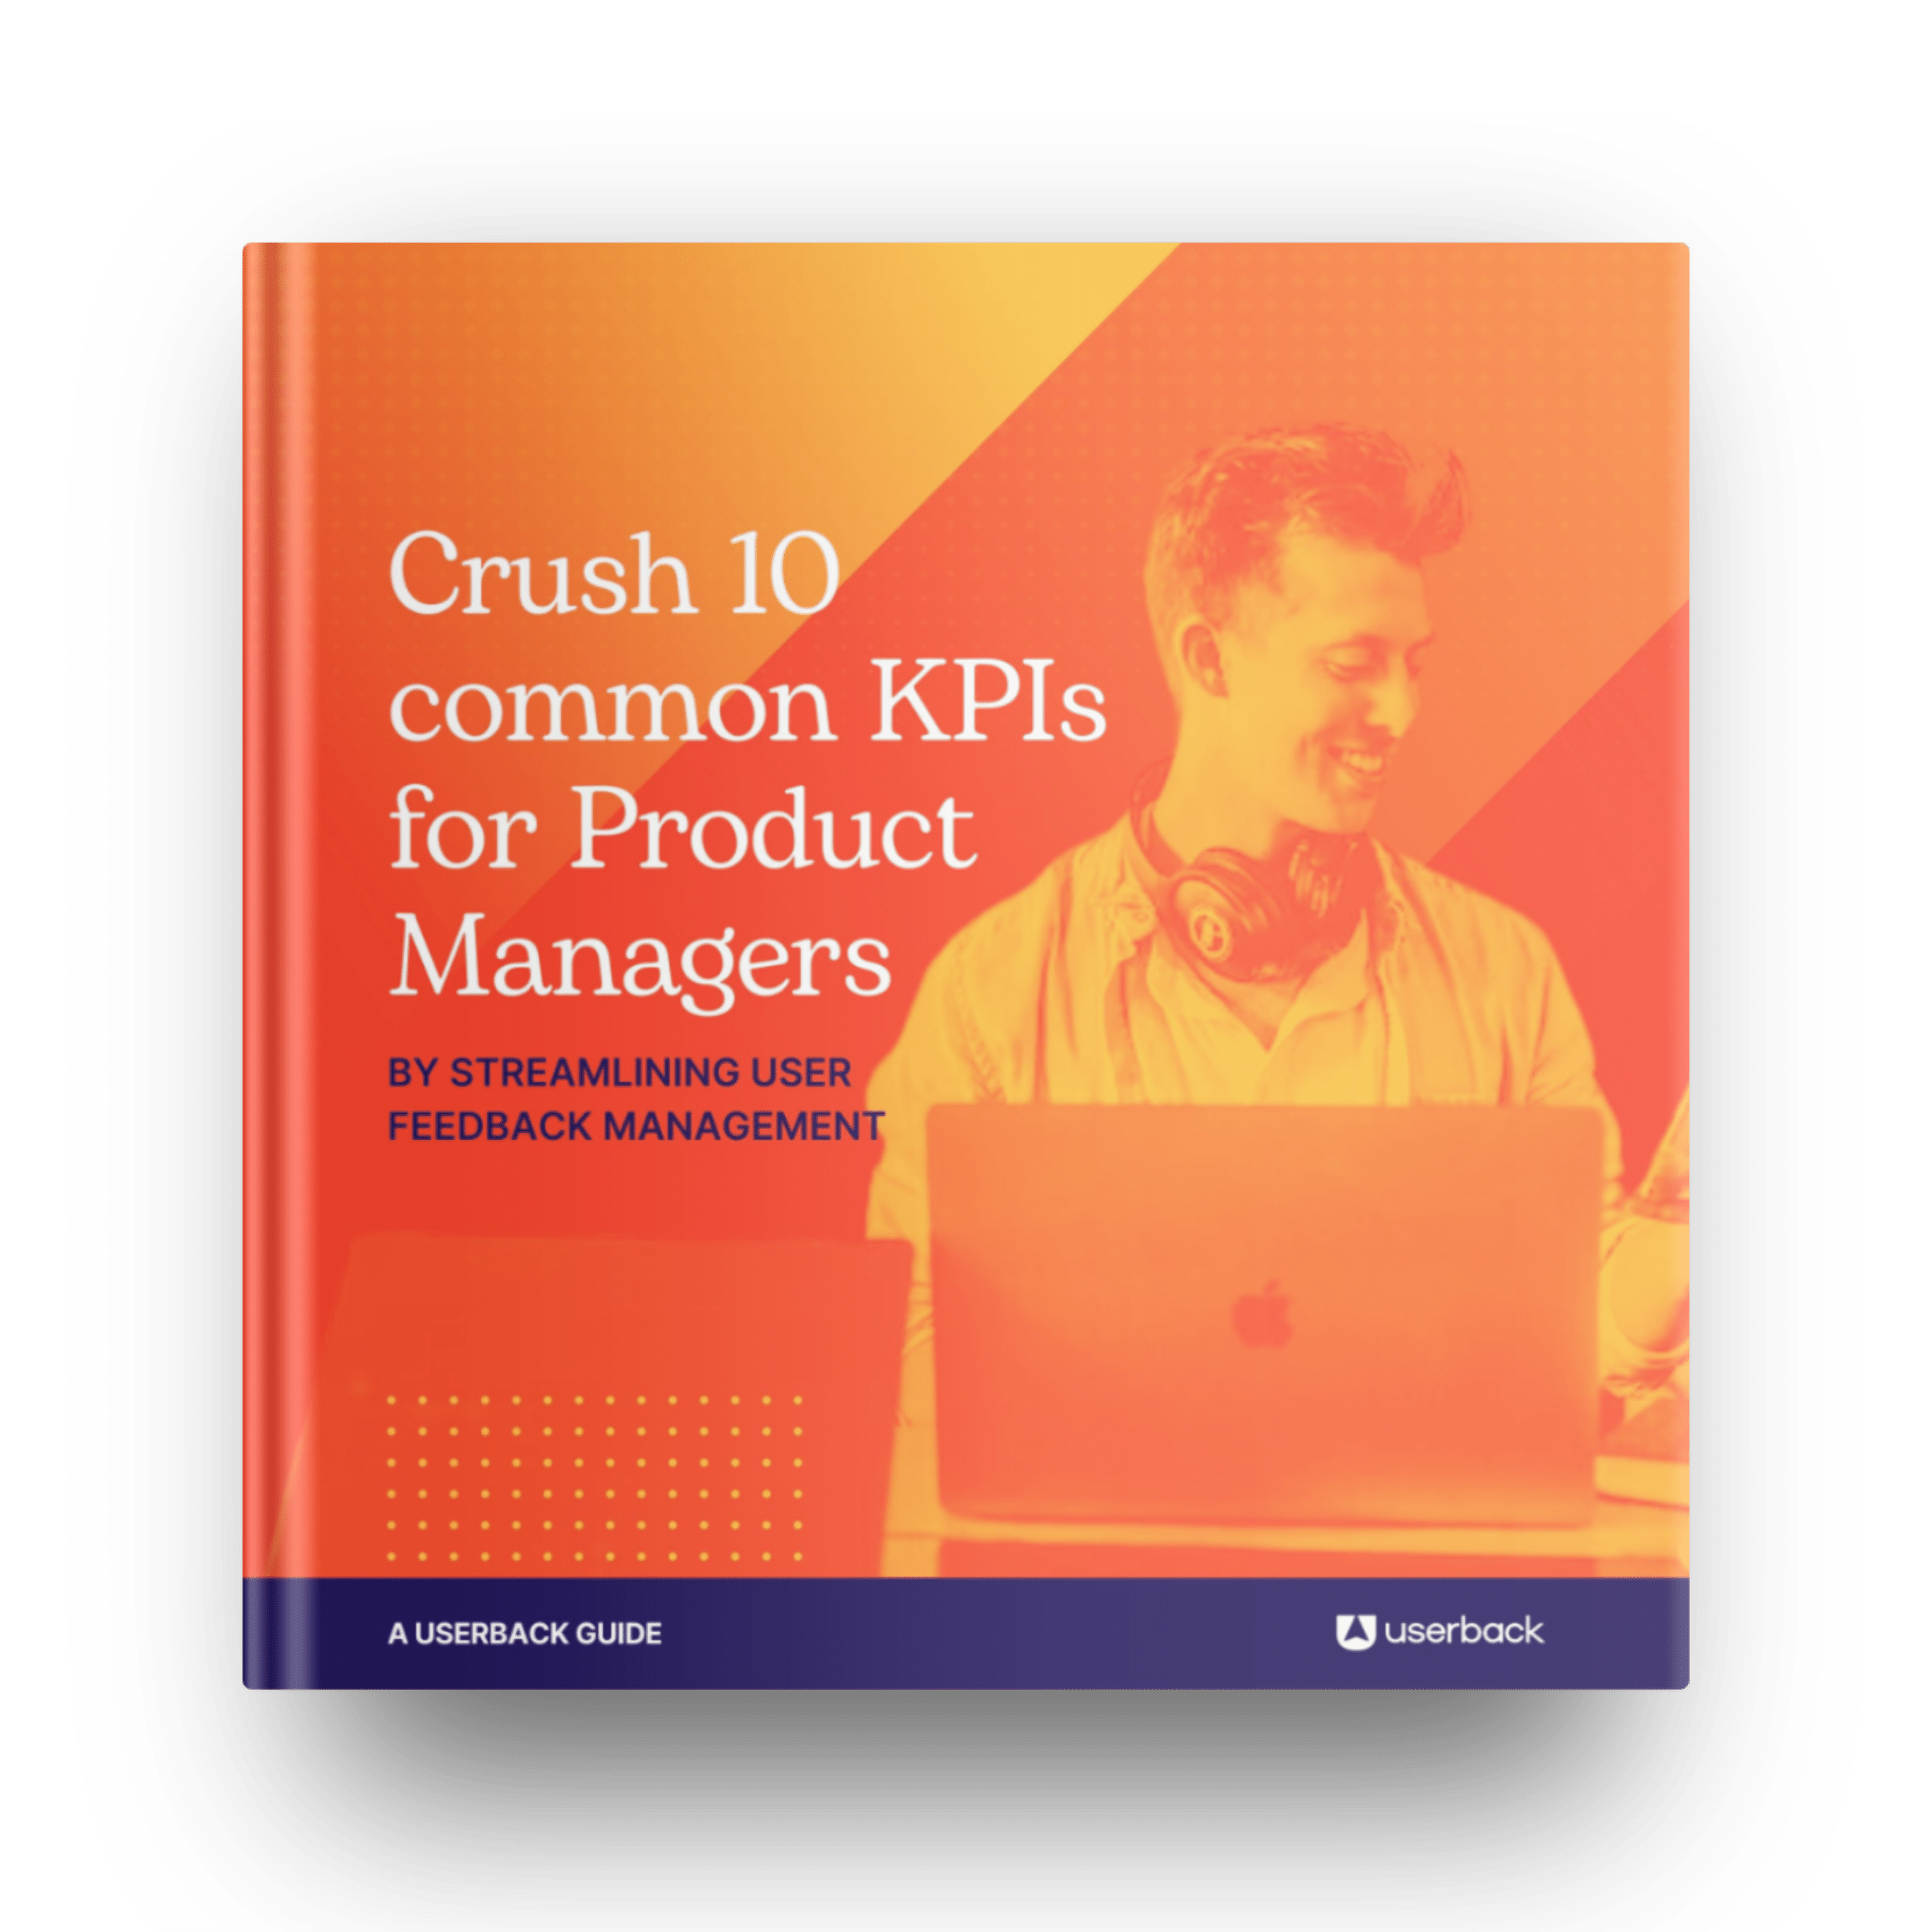 Crush 10 common KPIs for Product Managers